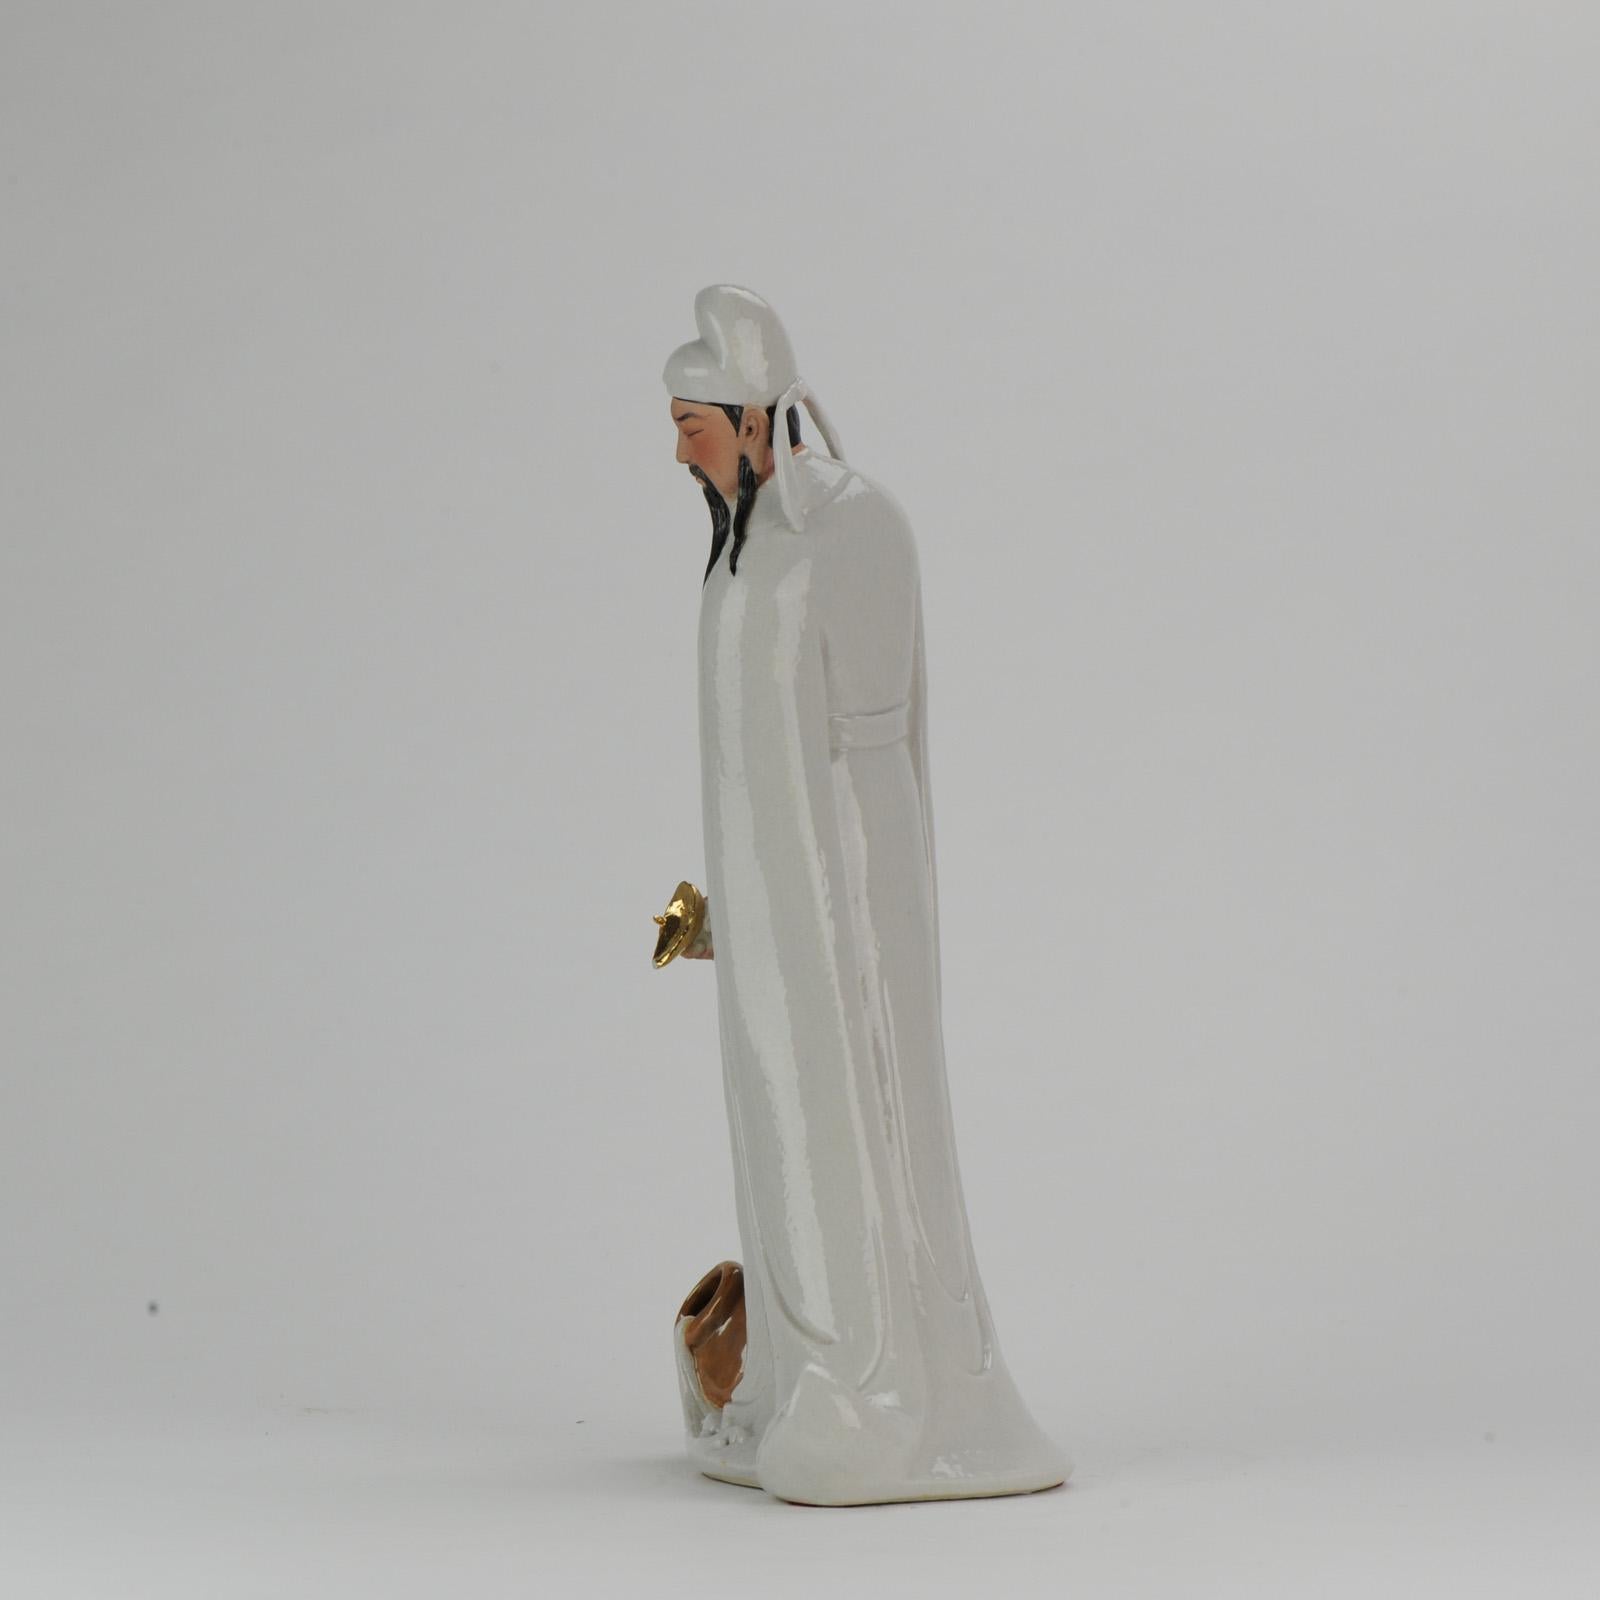 20th Century Chinese Porcelain Sculpture Man Holding Ritual Vessel, Dated 1998, Wang Qiang For Sale